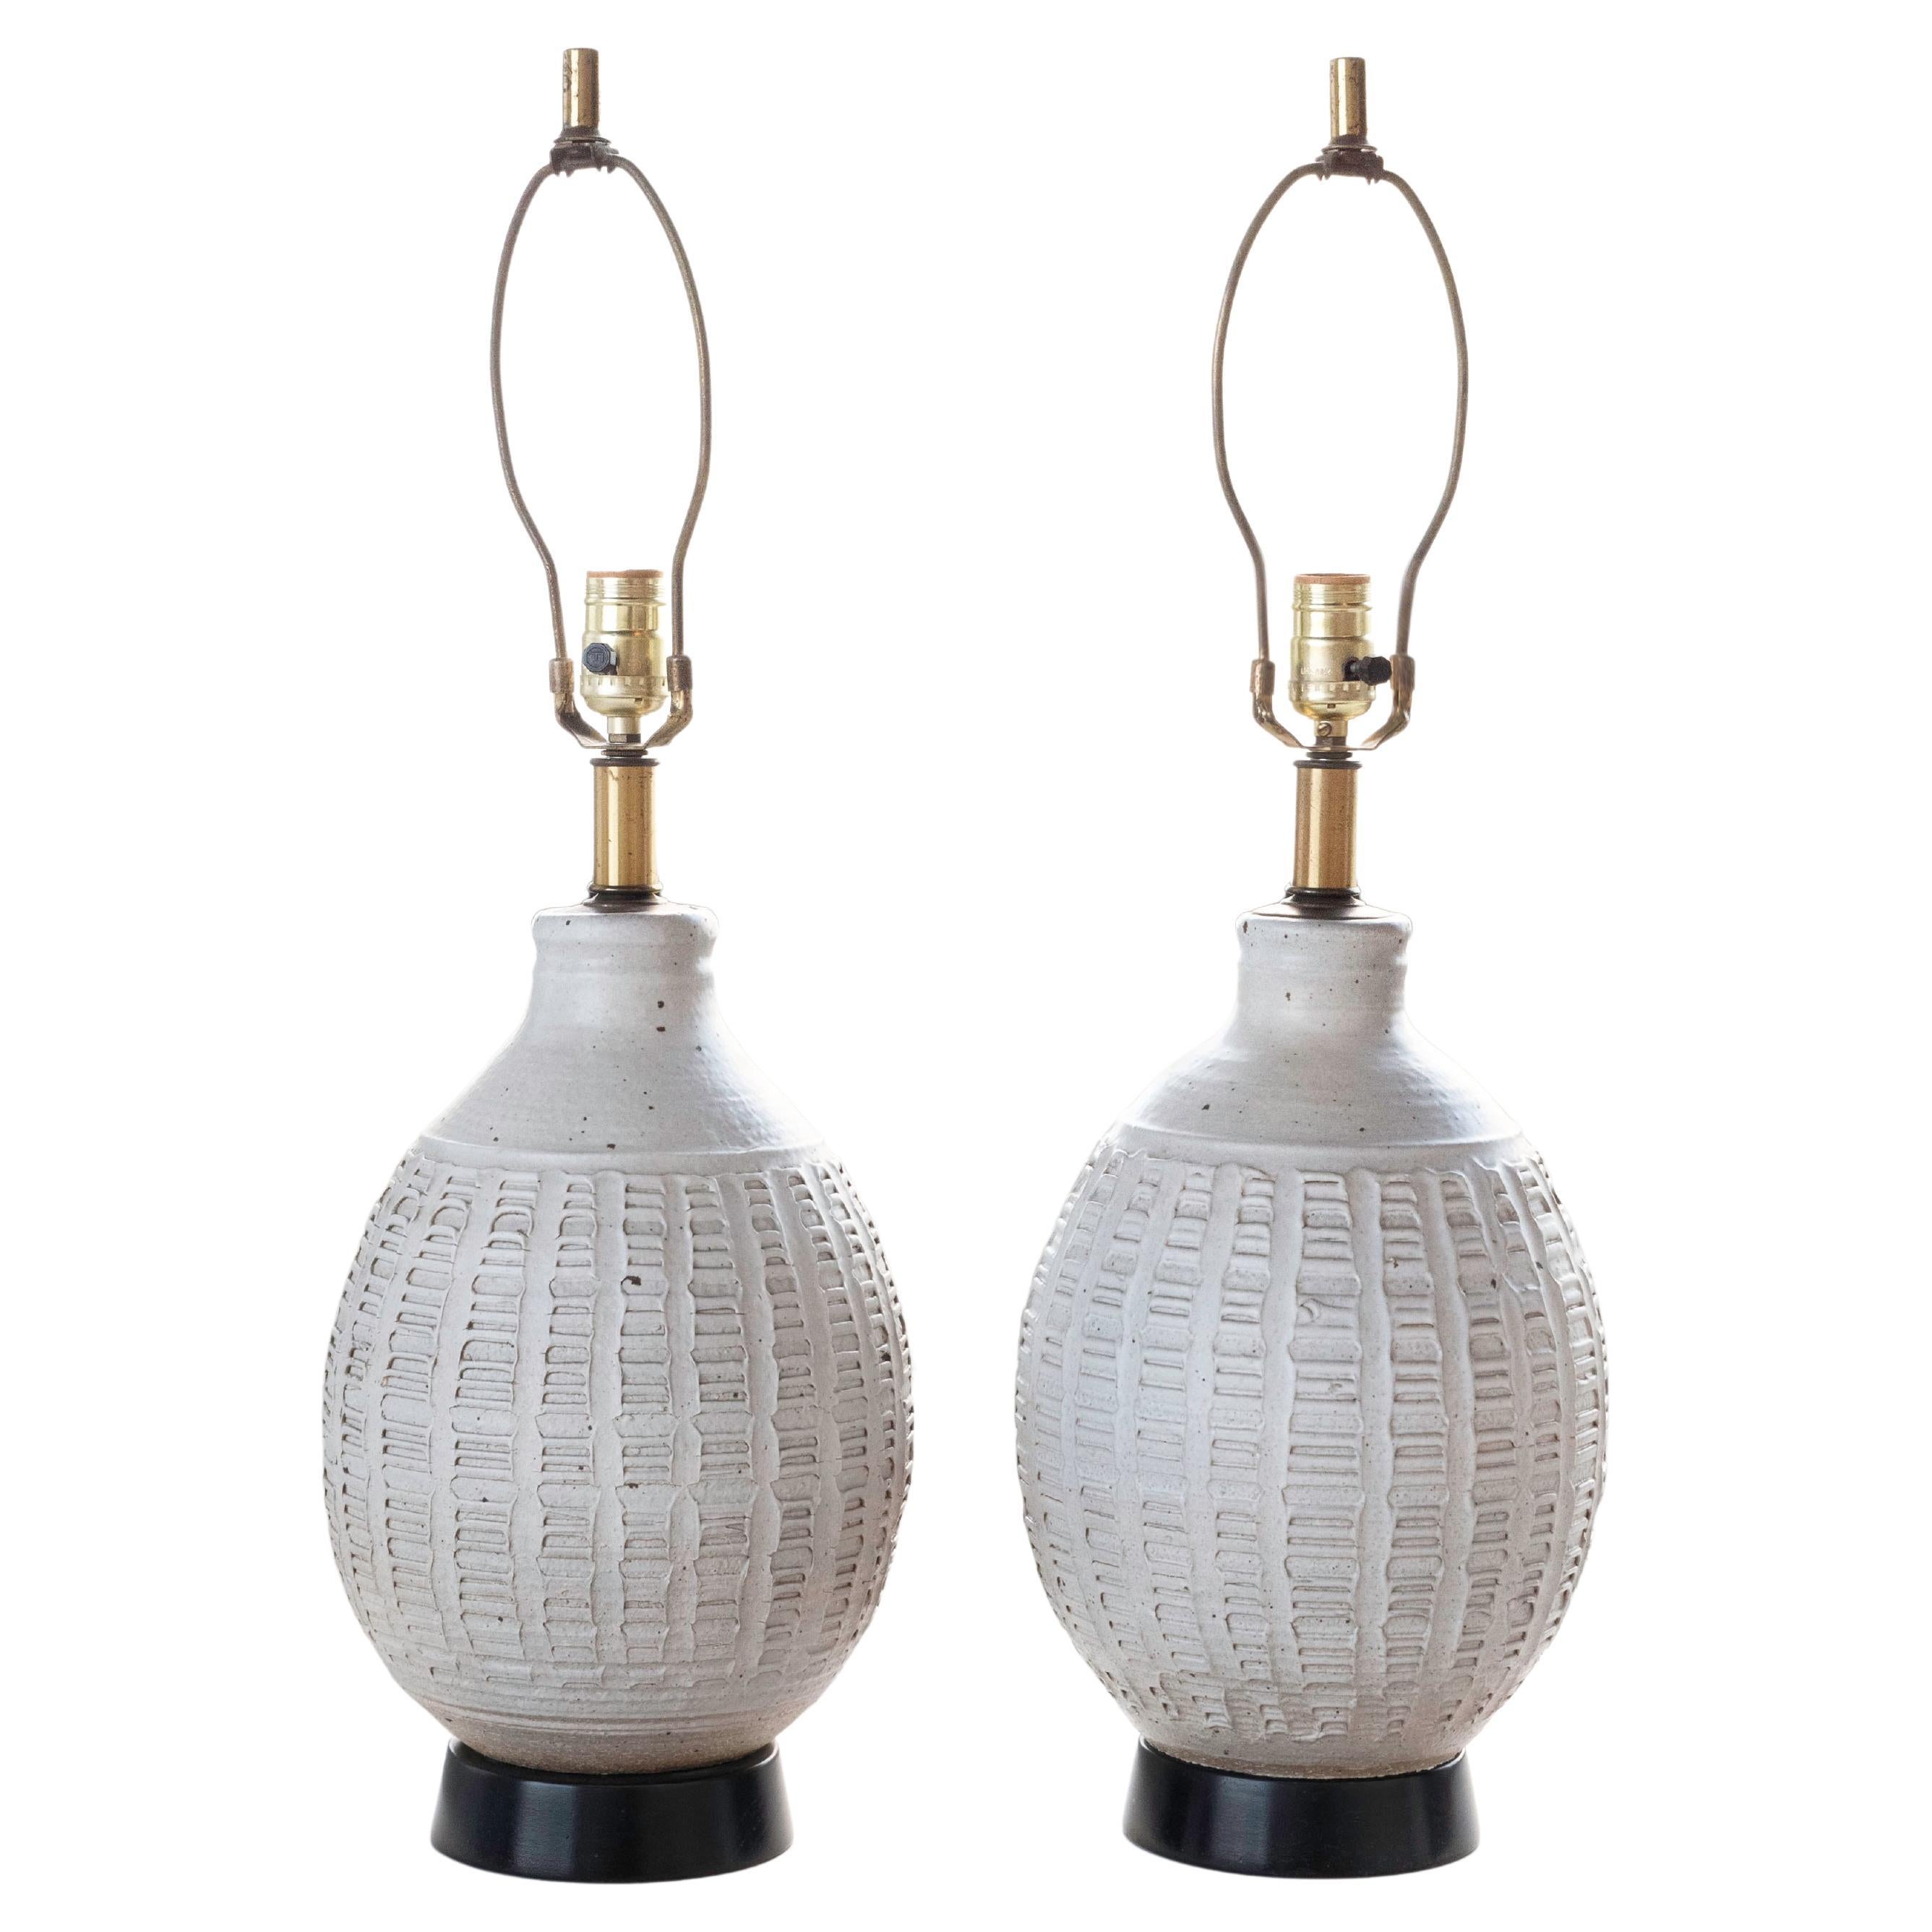 Bob Kinzie Pair of White Glazed Table Lamps for Affiliated Craftsmen, 1960s